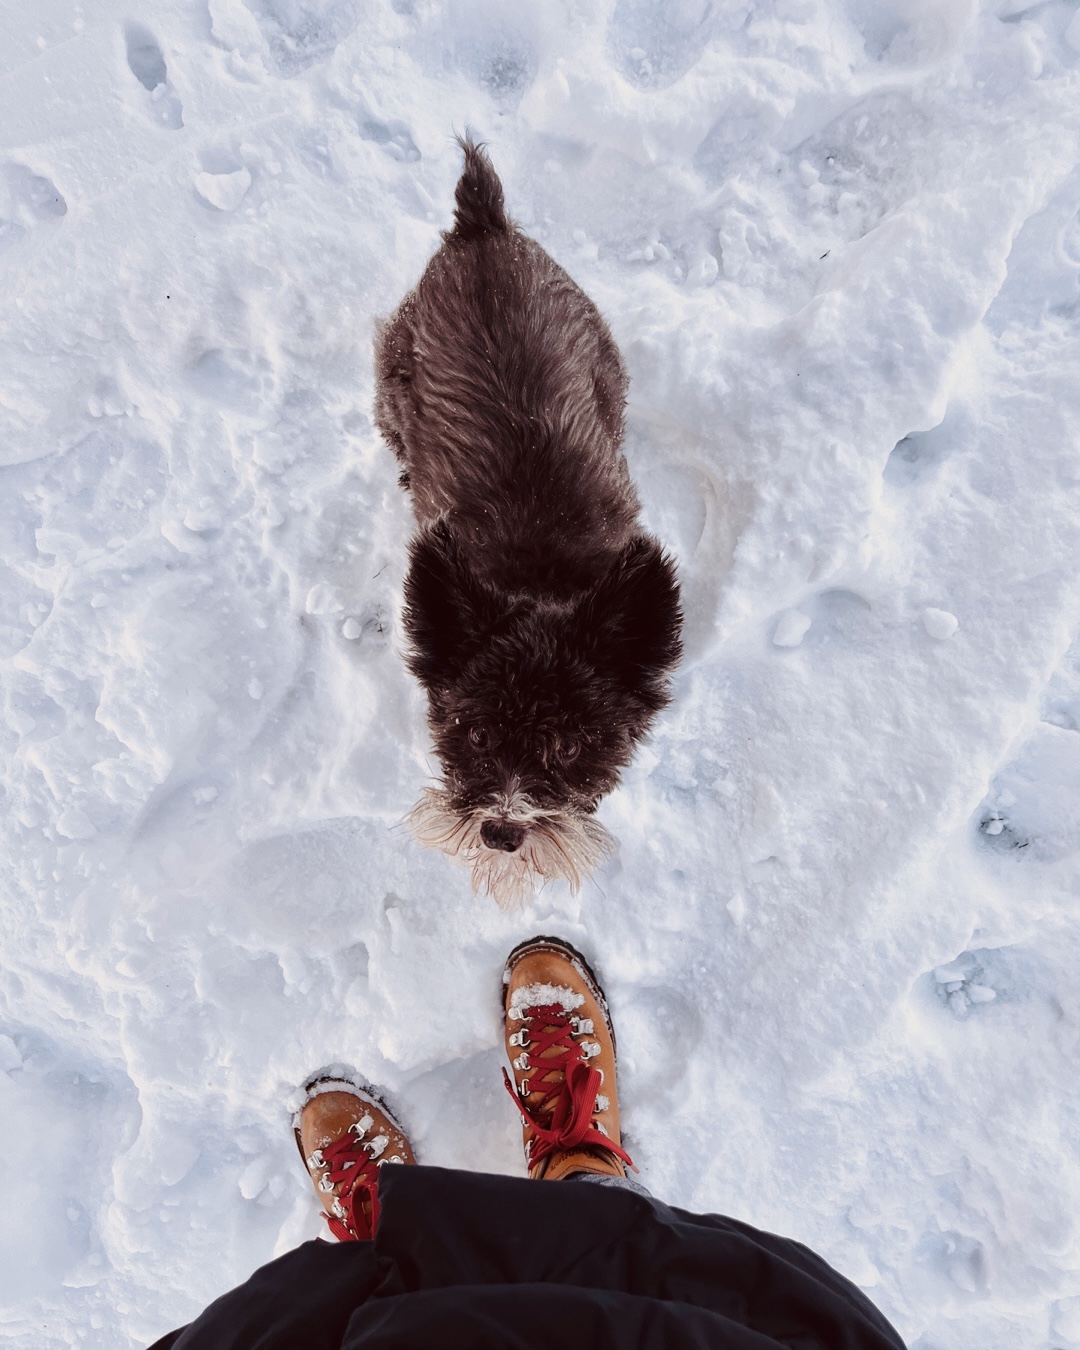 A photo taken from above of a small brown miniature schnauzer. She is looking up at the camera. The ground around her is covered in snow .A pair of tan hiking boots with red laces and the bottom of a black coat are visible at the bottom of the photo.